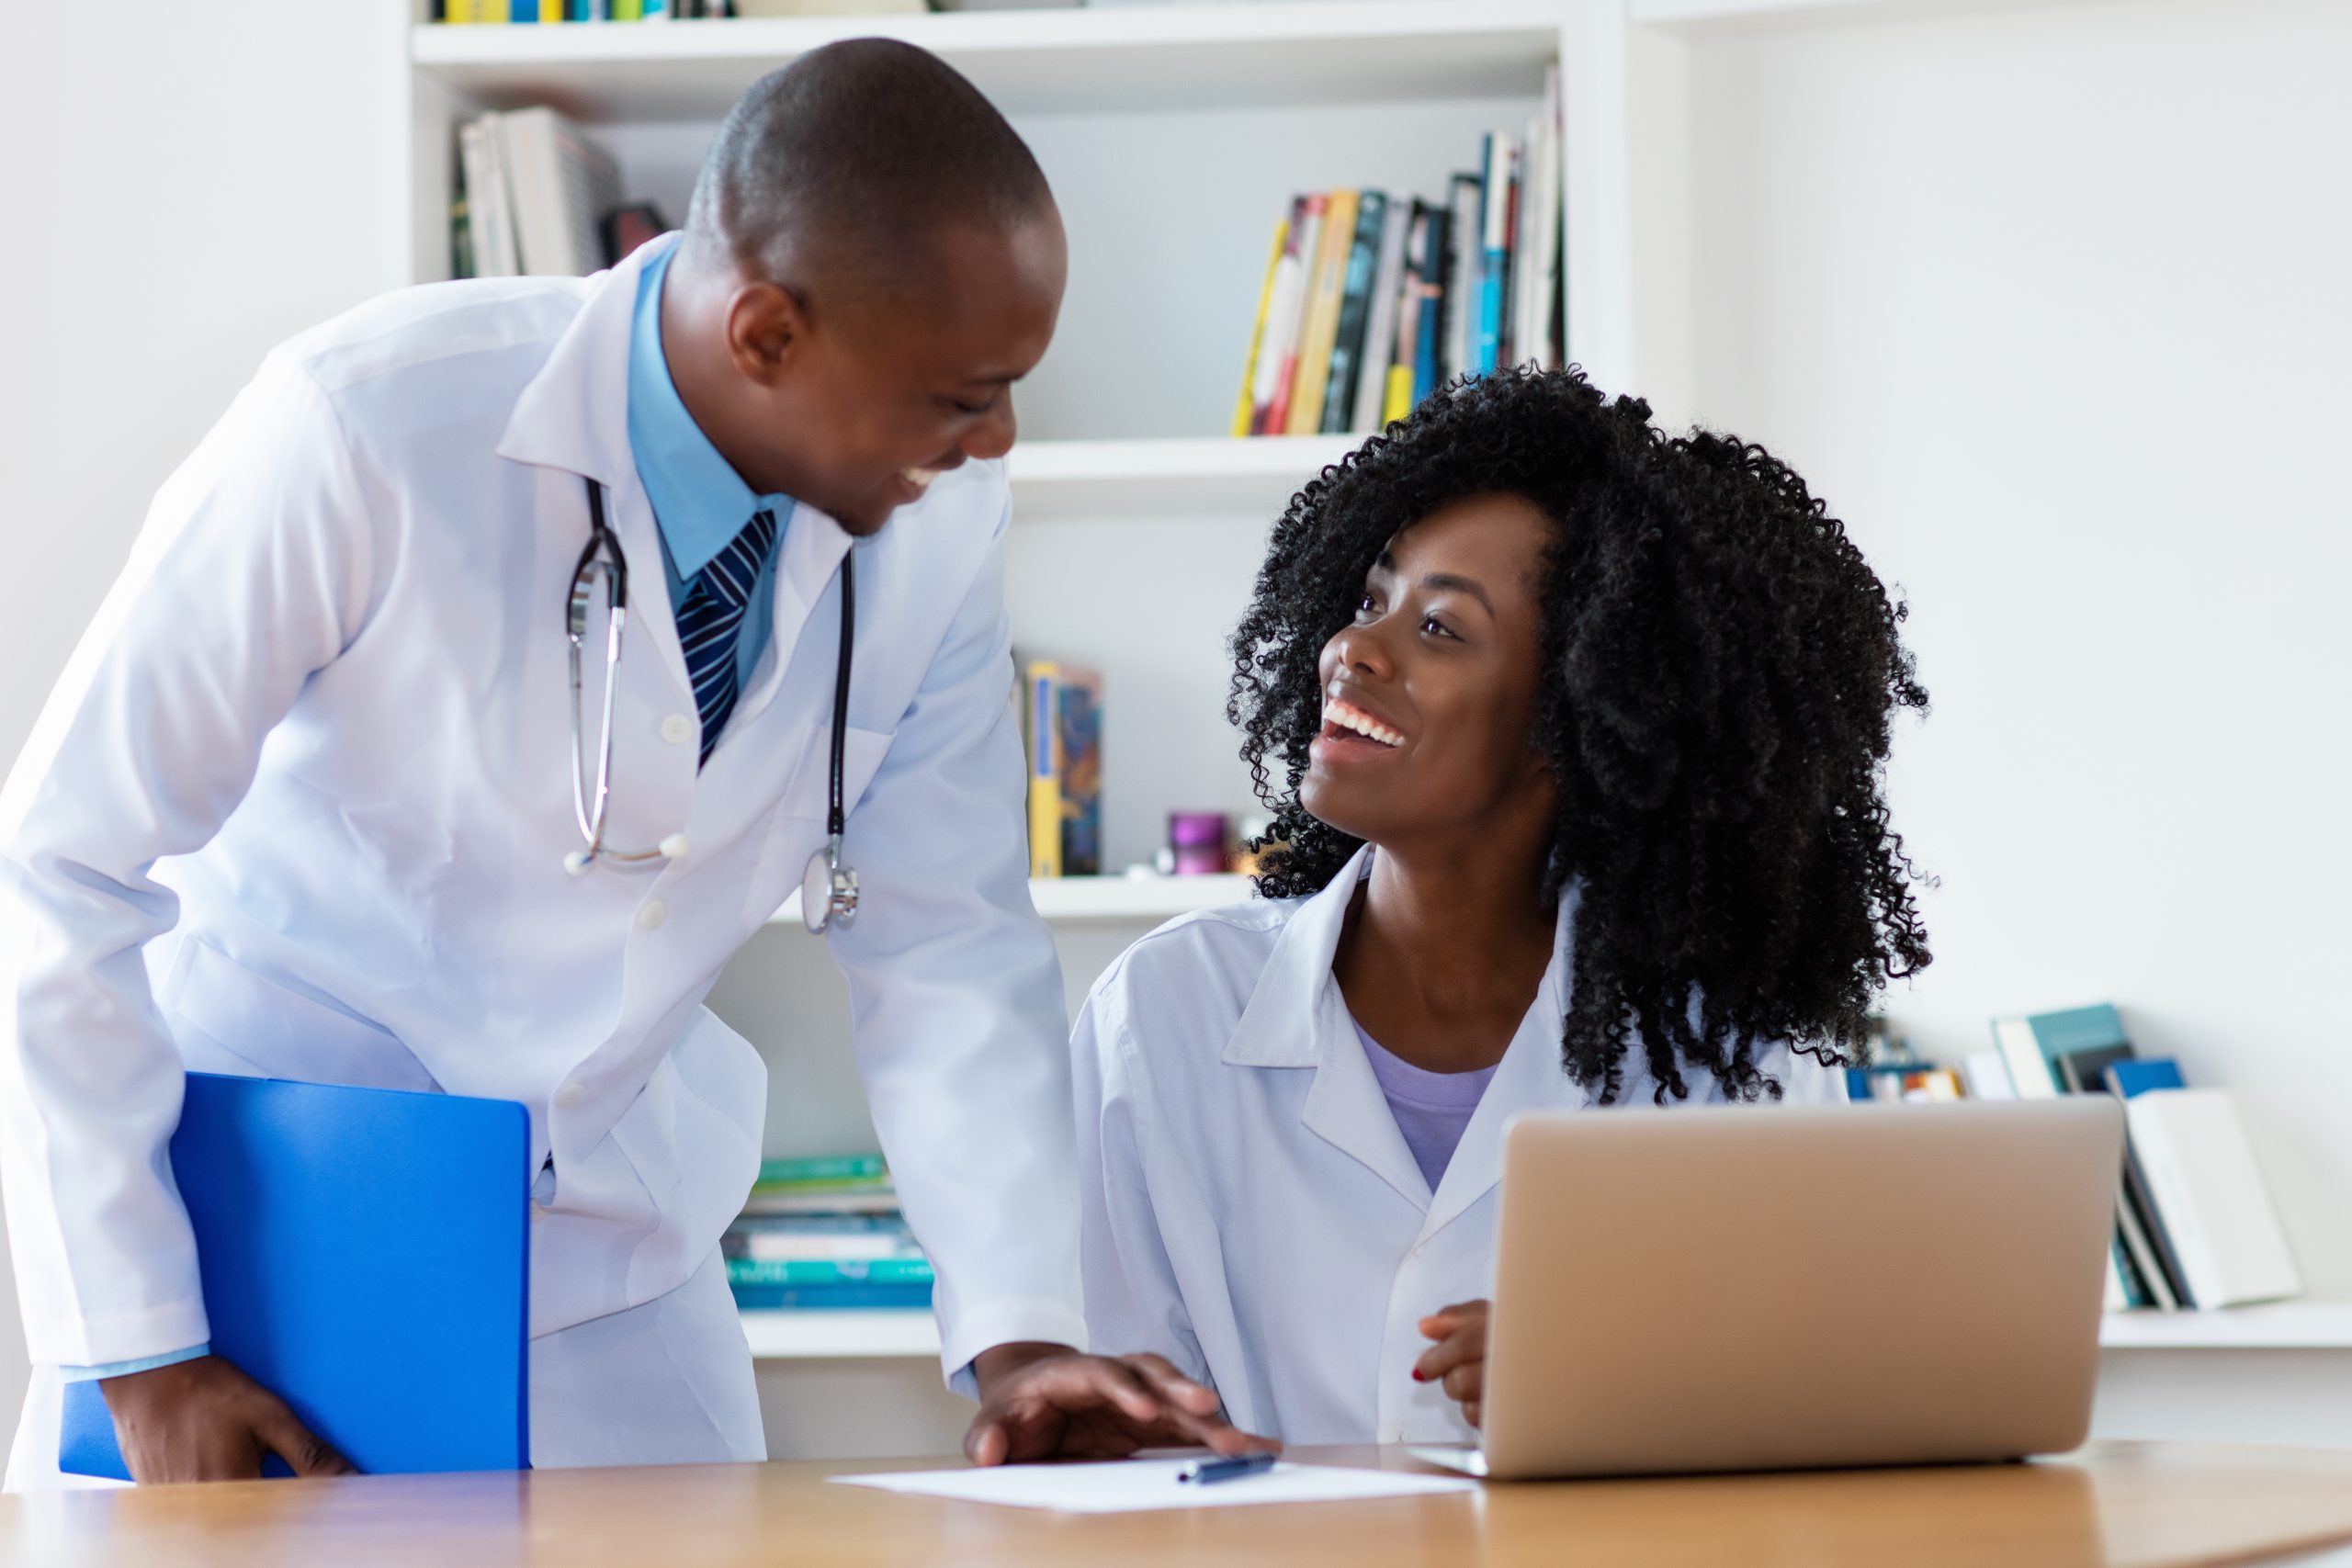 A Black male chief physician leans over a table and smiles at a smiling Black woman doctor as she is seated behind the same table with a laptop in front of her.